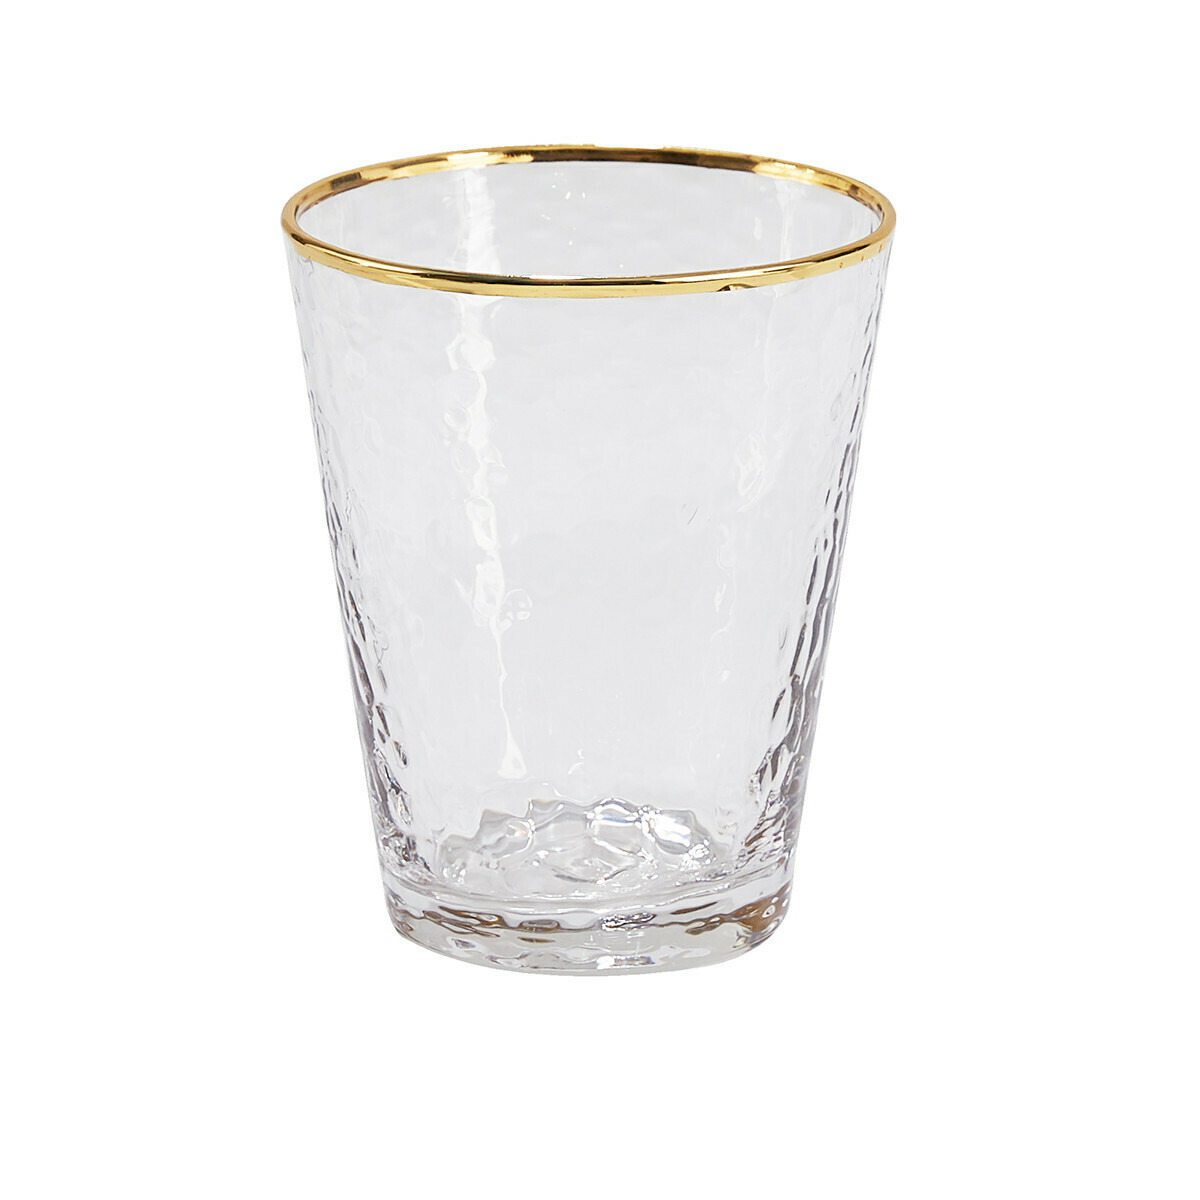 Gold Metallic Rim Double Old Fashioned Glass